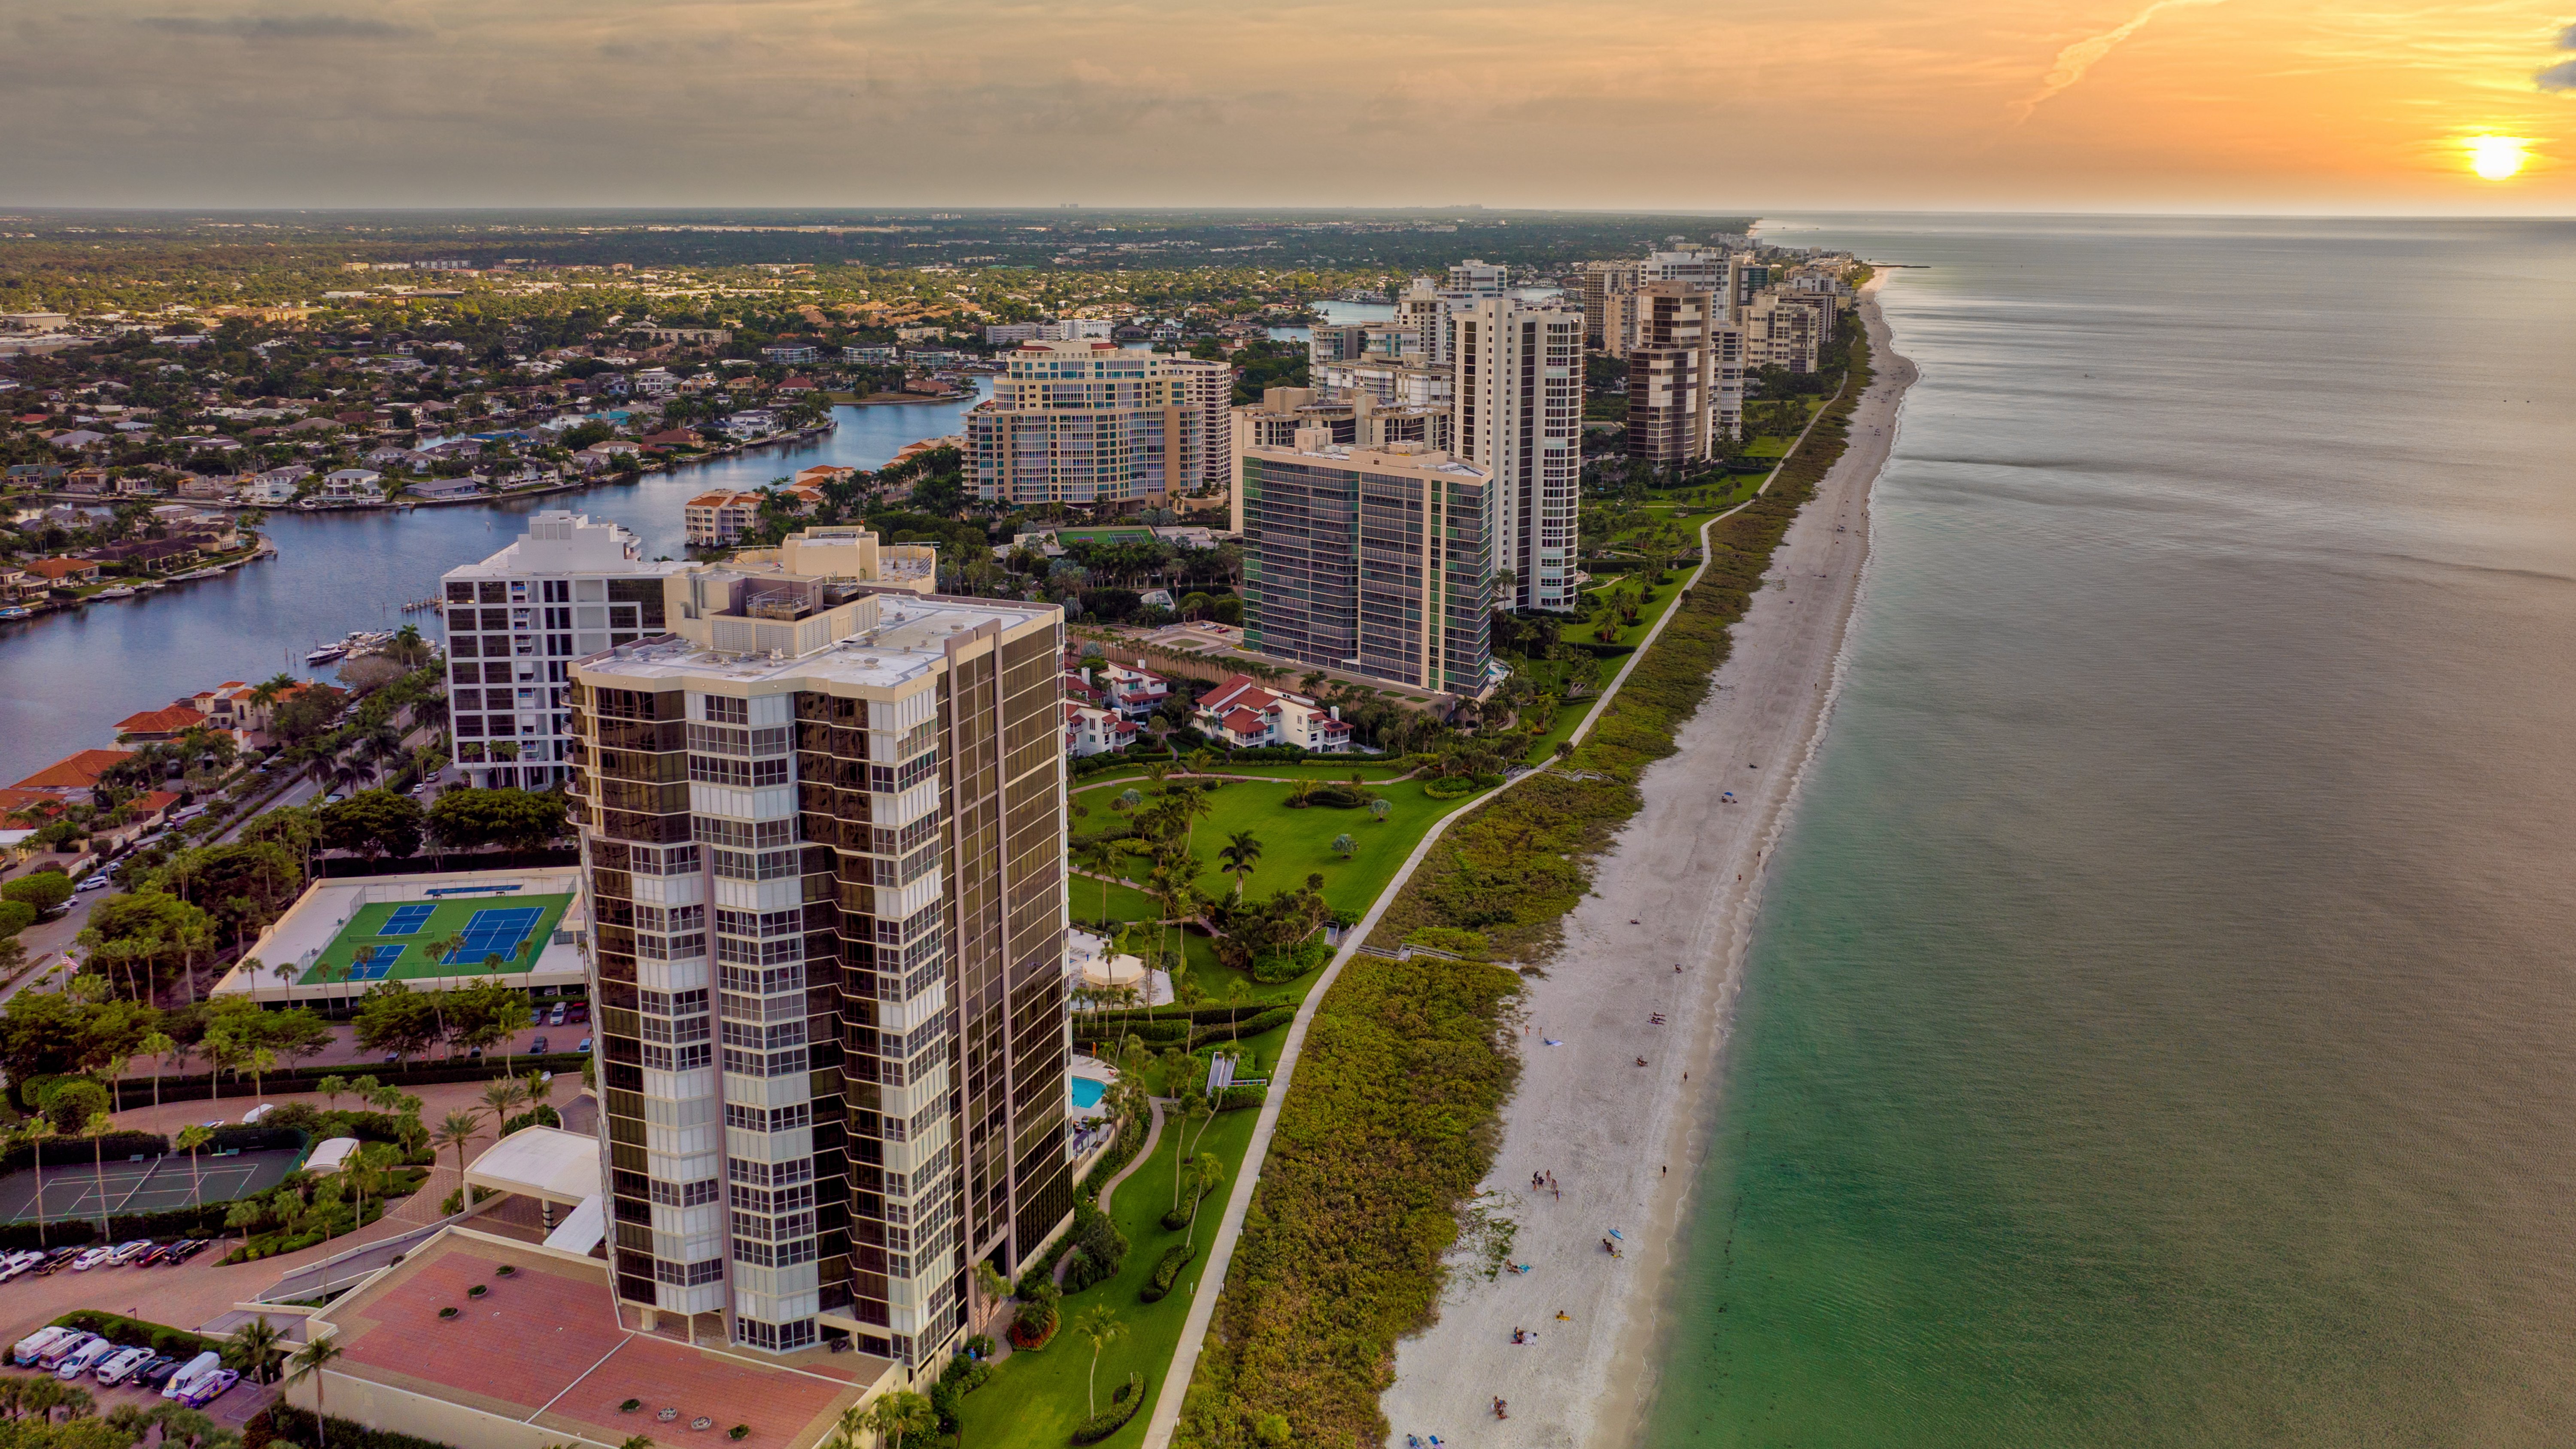 Annie Hagstroom How To Identify The Best of Naples’ Beachfront Condos for Sale